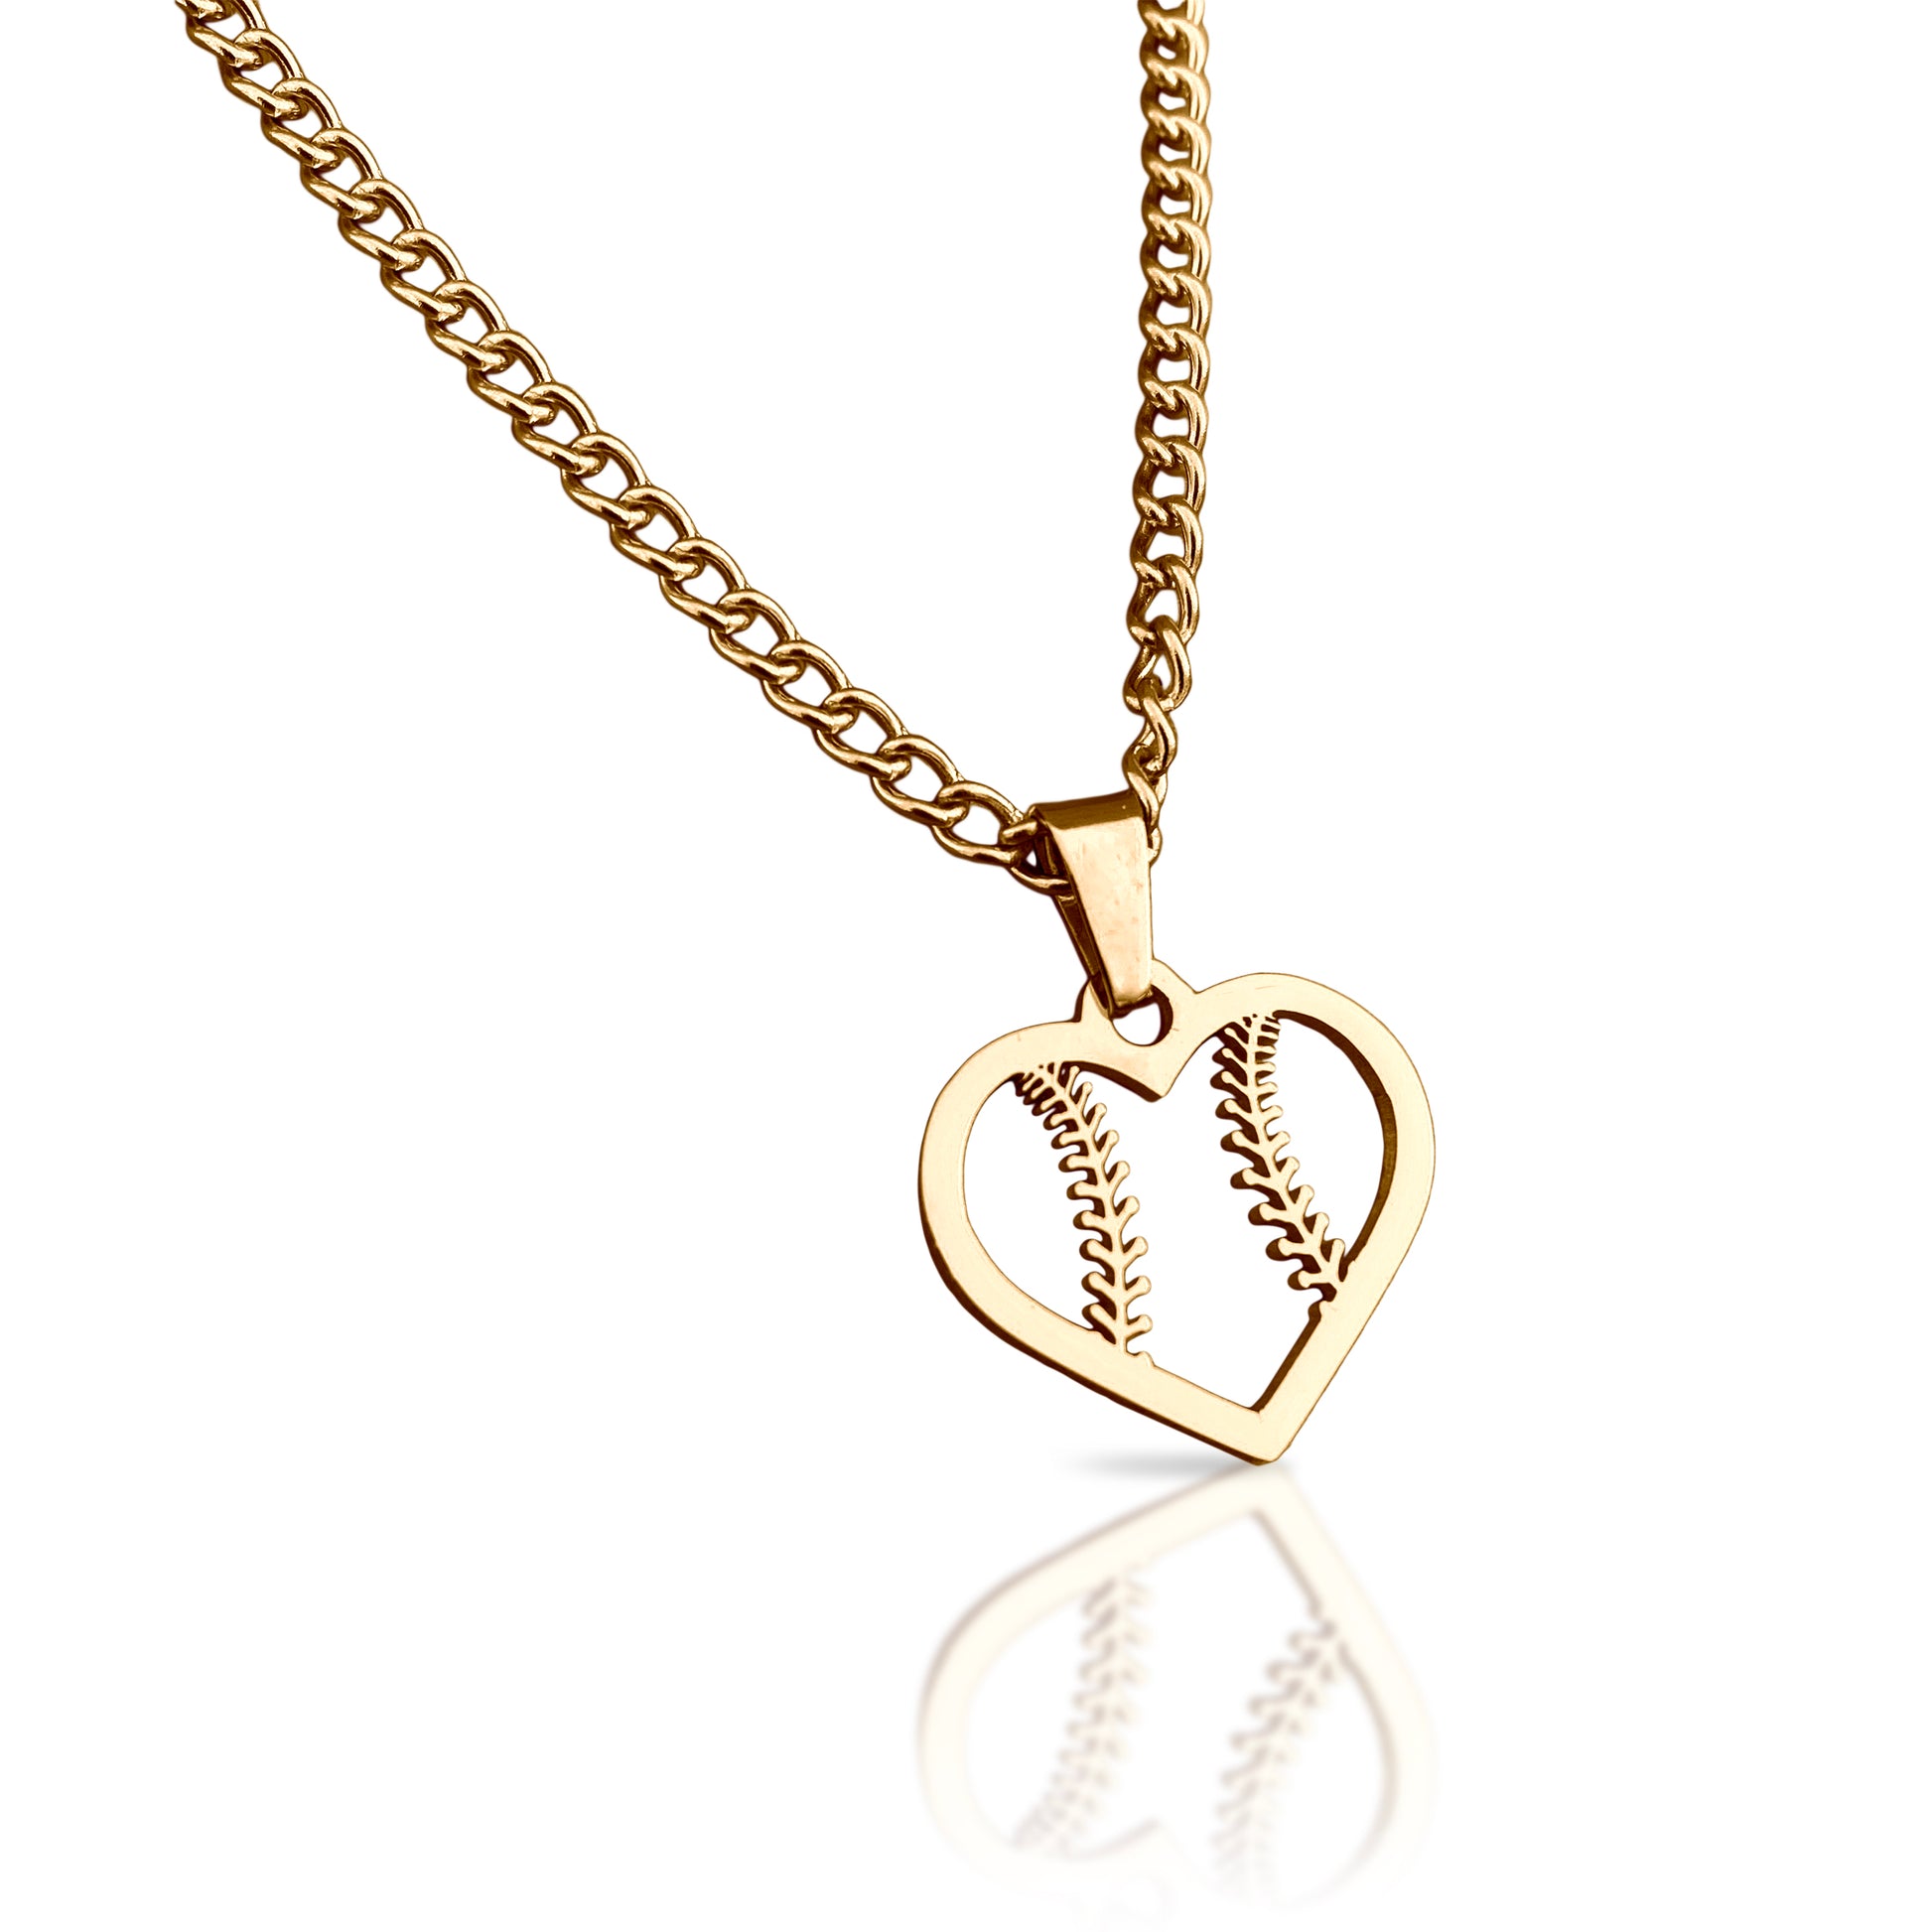 Baseball / Softball Heart Pendant With Chain Necklace - 14K Gold Plated Stainless Steel